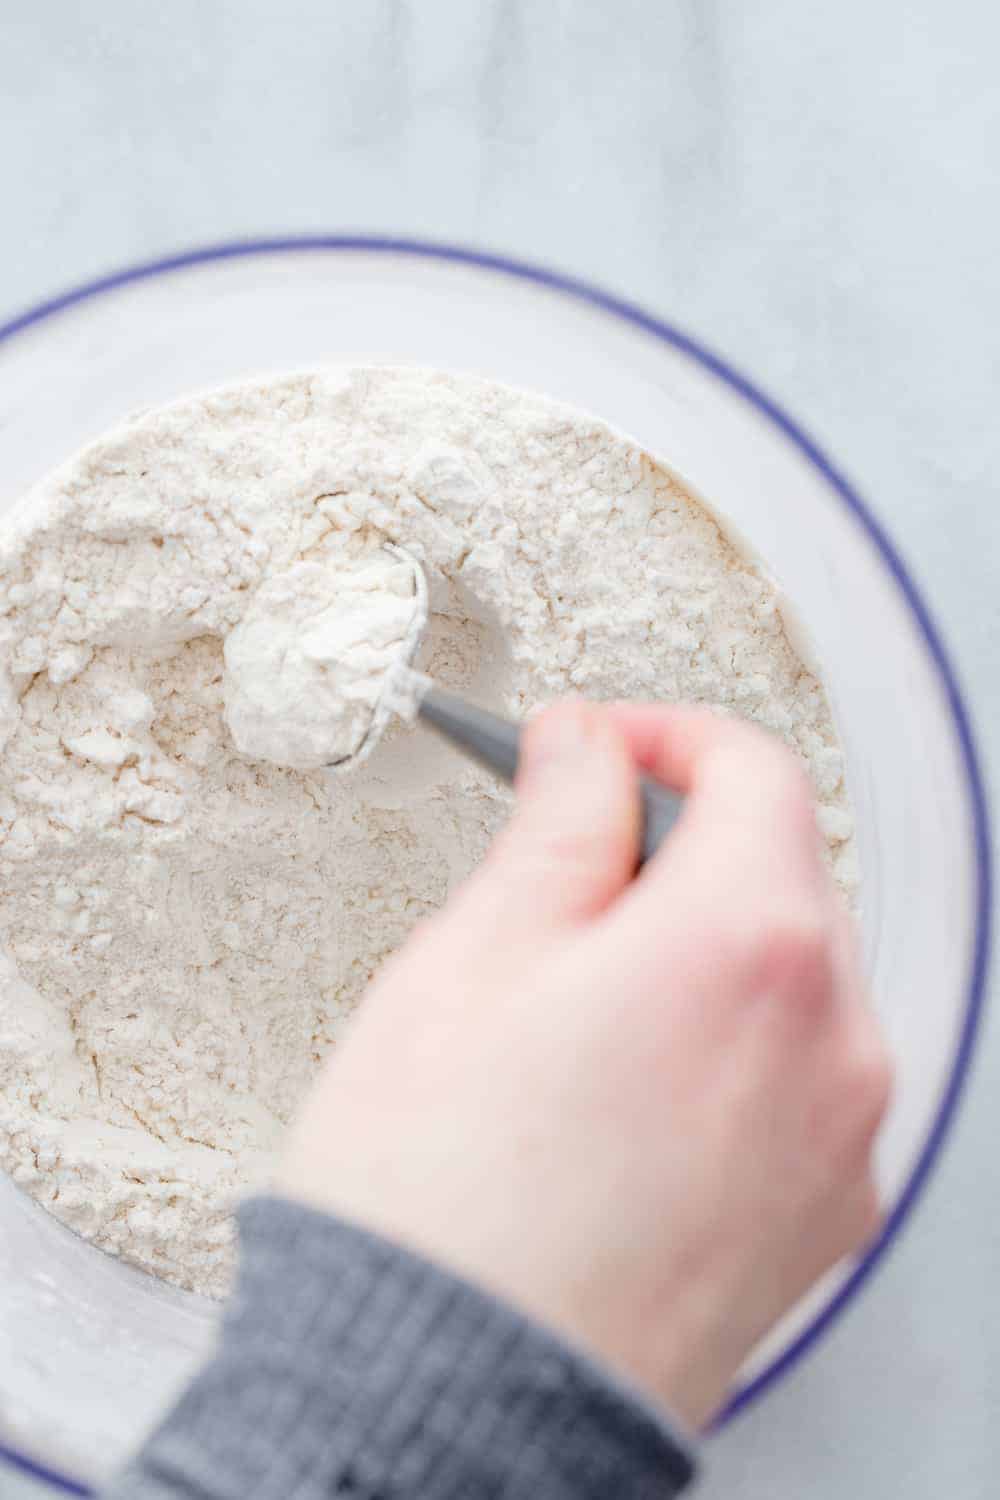 Hand using a spoon to fluff and stir the flour in a bowl